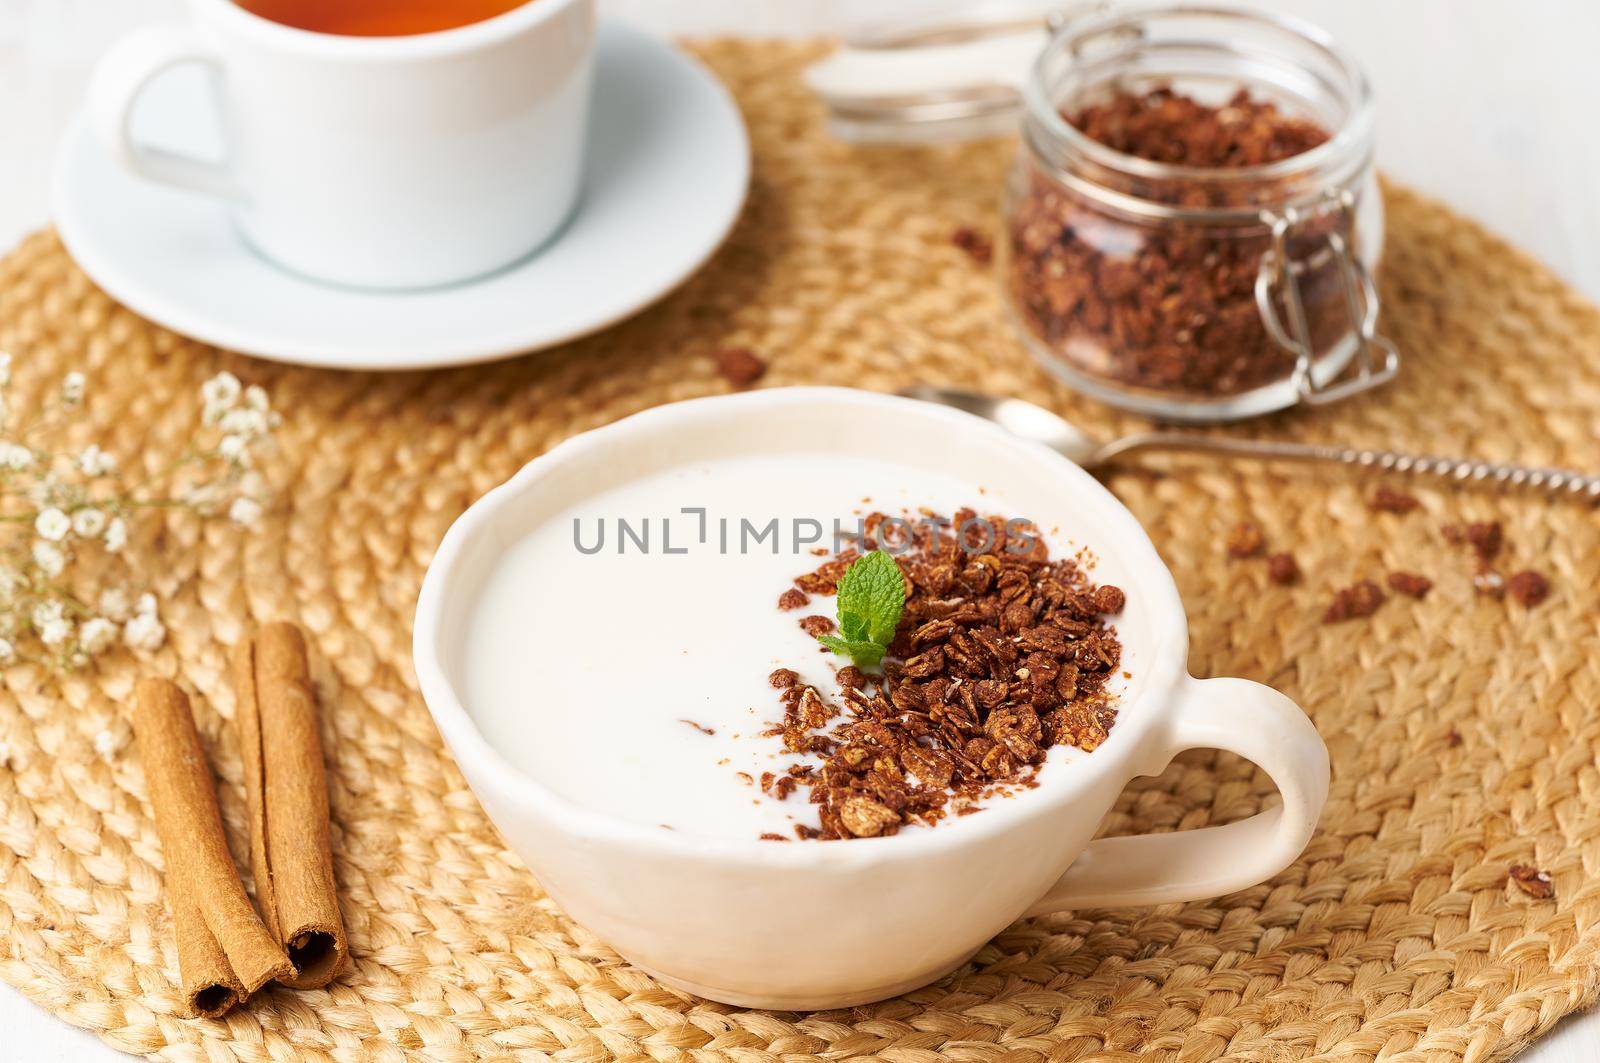 Yogurt with chocolate granola in cup, breakfast with tea on beige background, side view